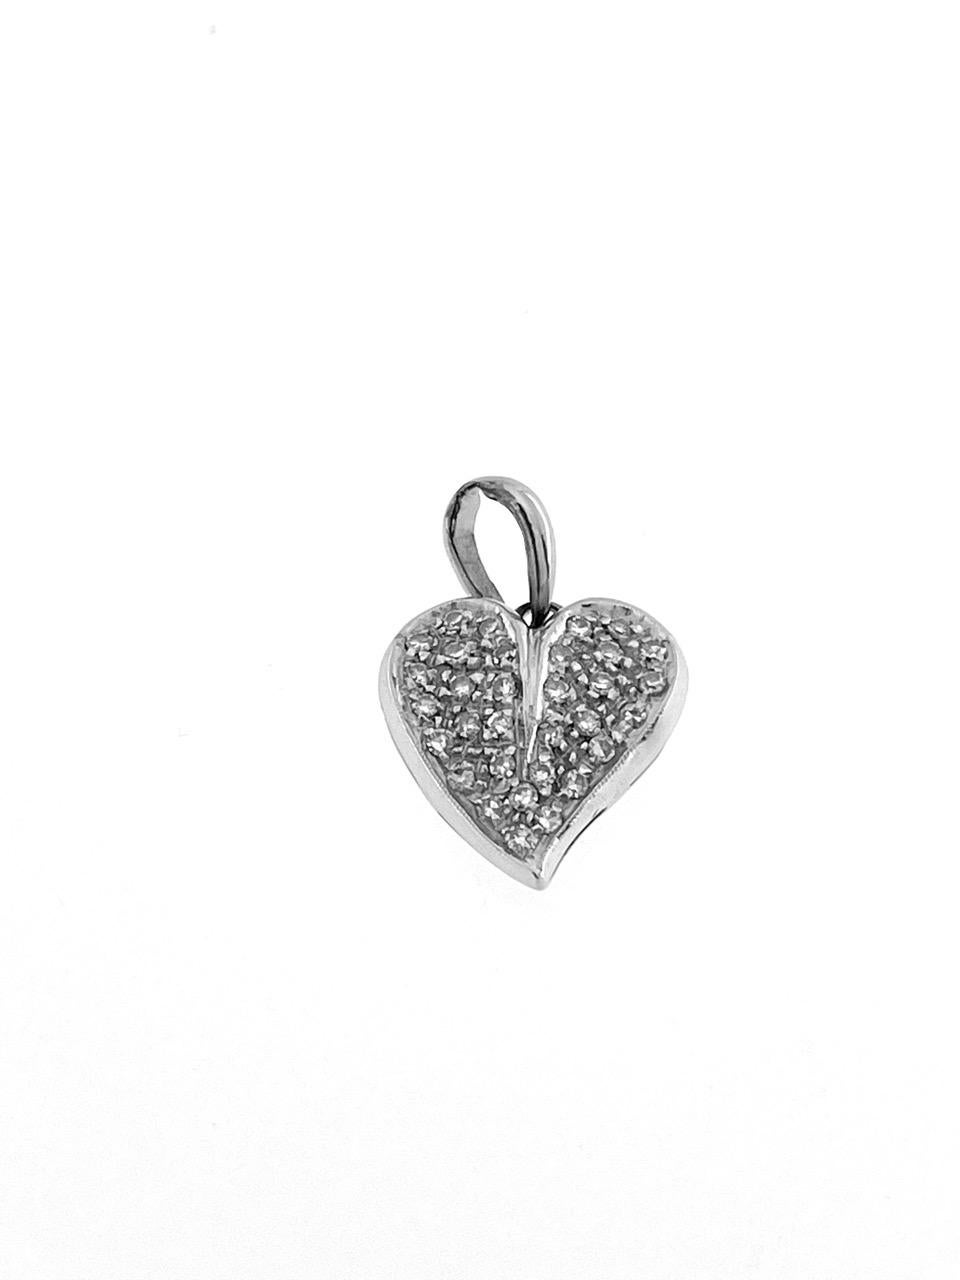 The Italian Heart Pendant in White Gold with Diamonds is an exquisite and glamorous piece of jewelry crafted with meticulous attention to detail. Made from 18-karat white gold, the pendant boasts a modern and sophisticated aesthetic.

This pendant